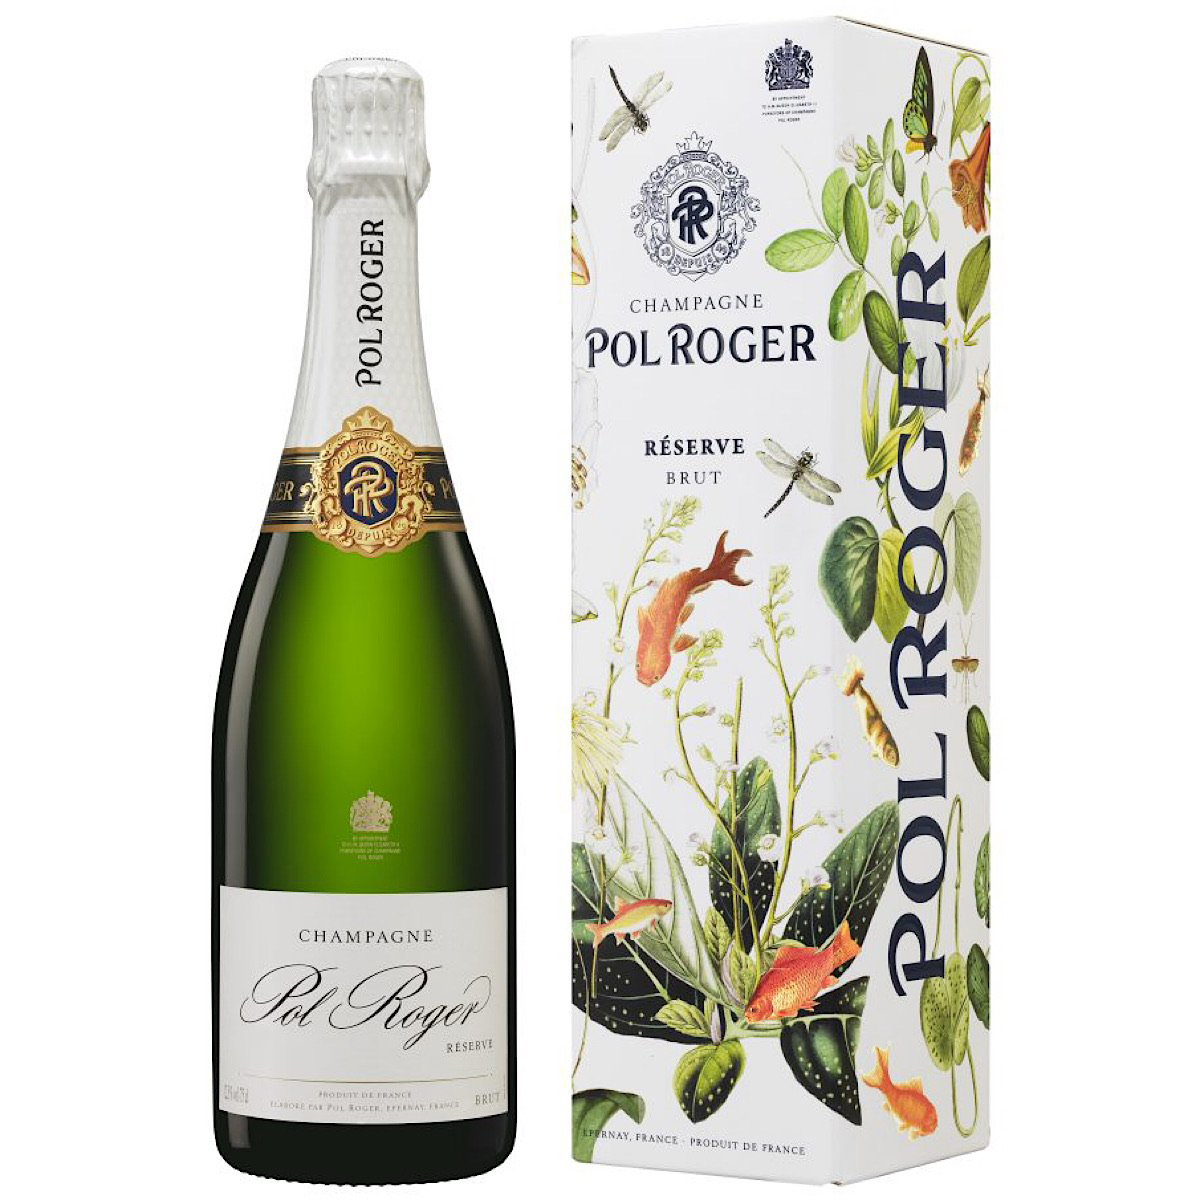 Pol Roger Brut Reserve Champagne 75cl Great Price and Home Delivery